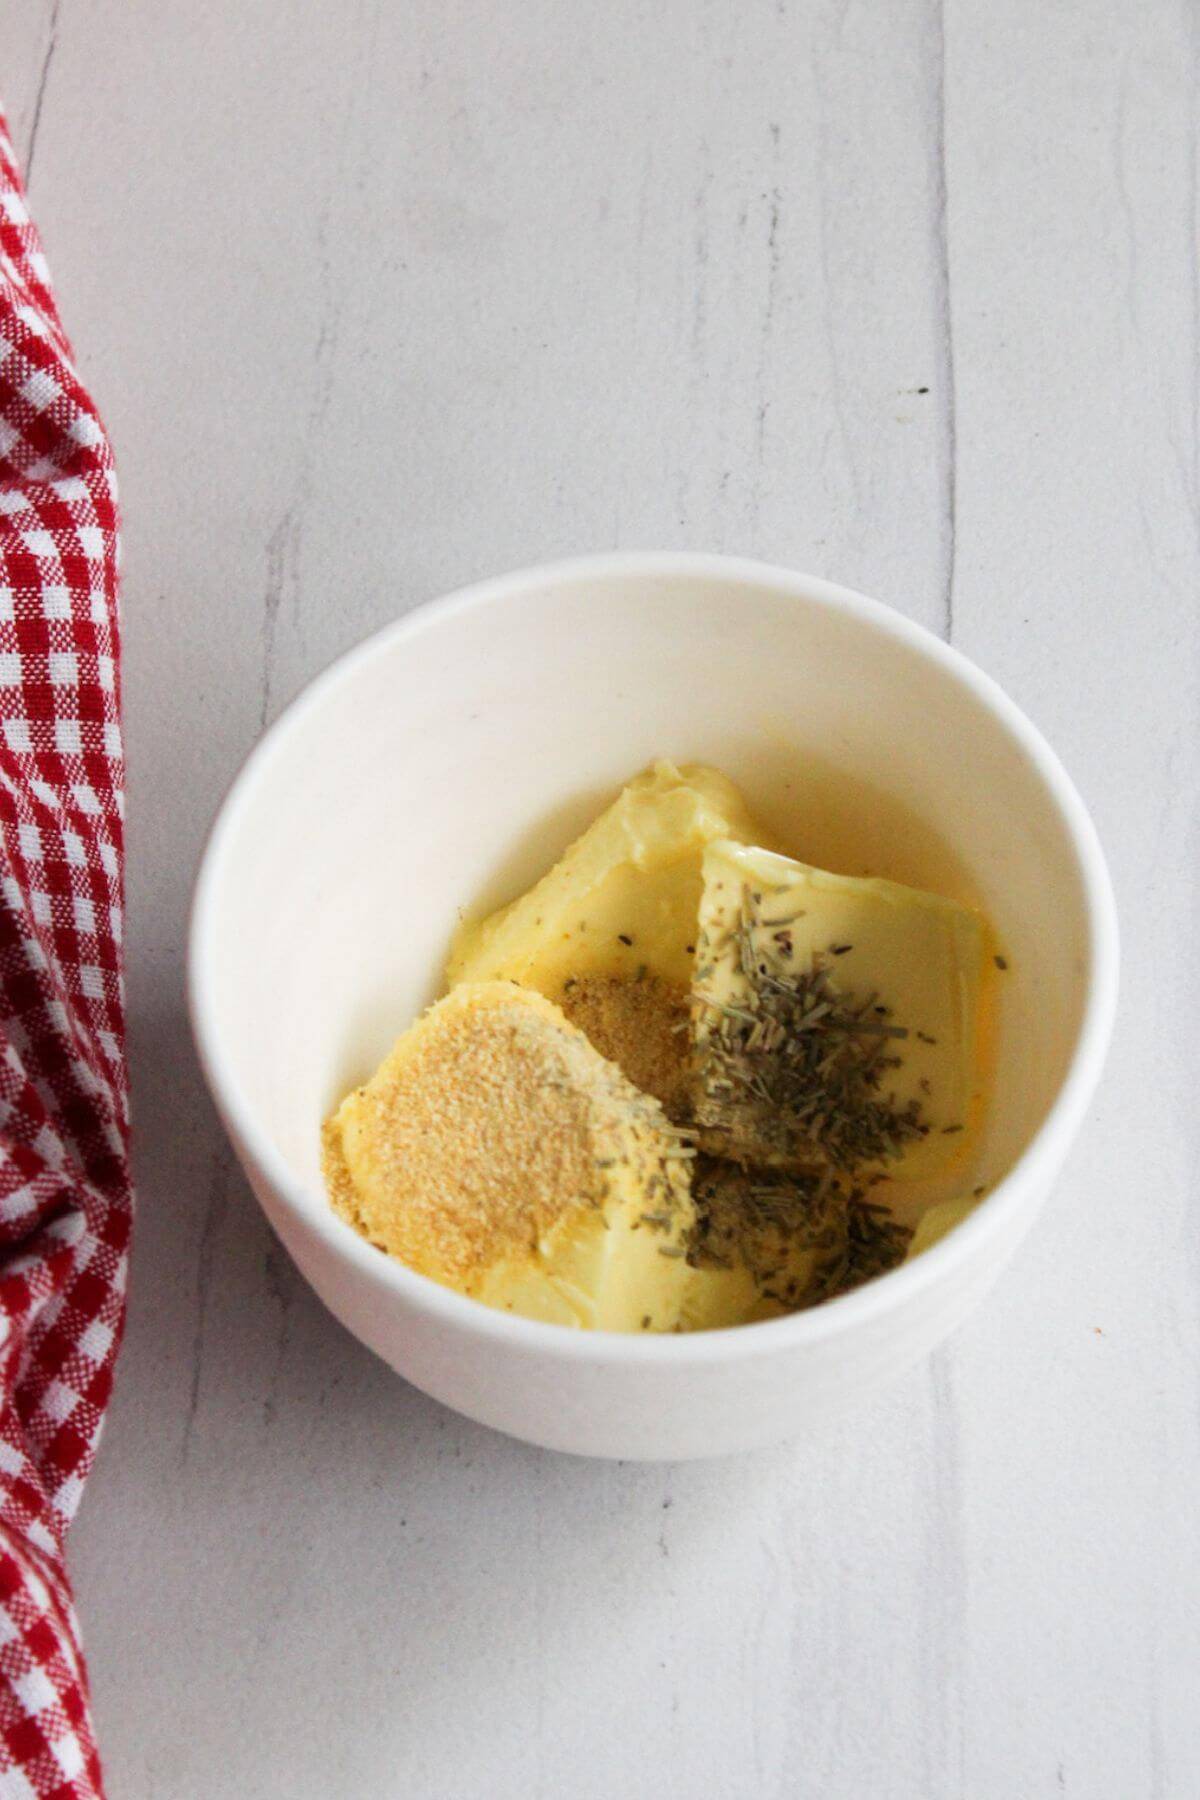 Butter and seasonings in a bowl next to a red and white checkered napkin.